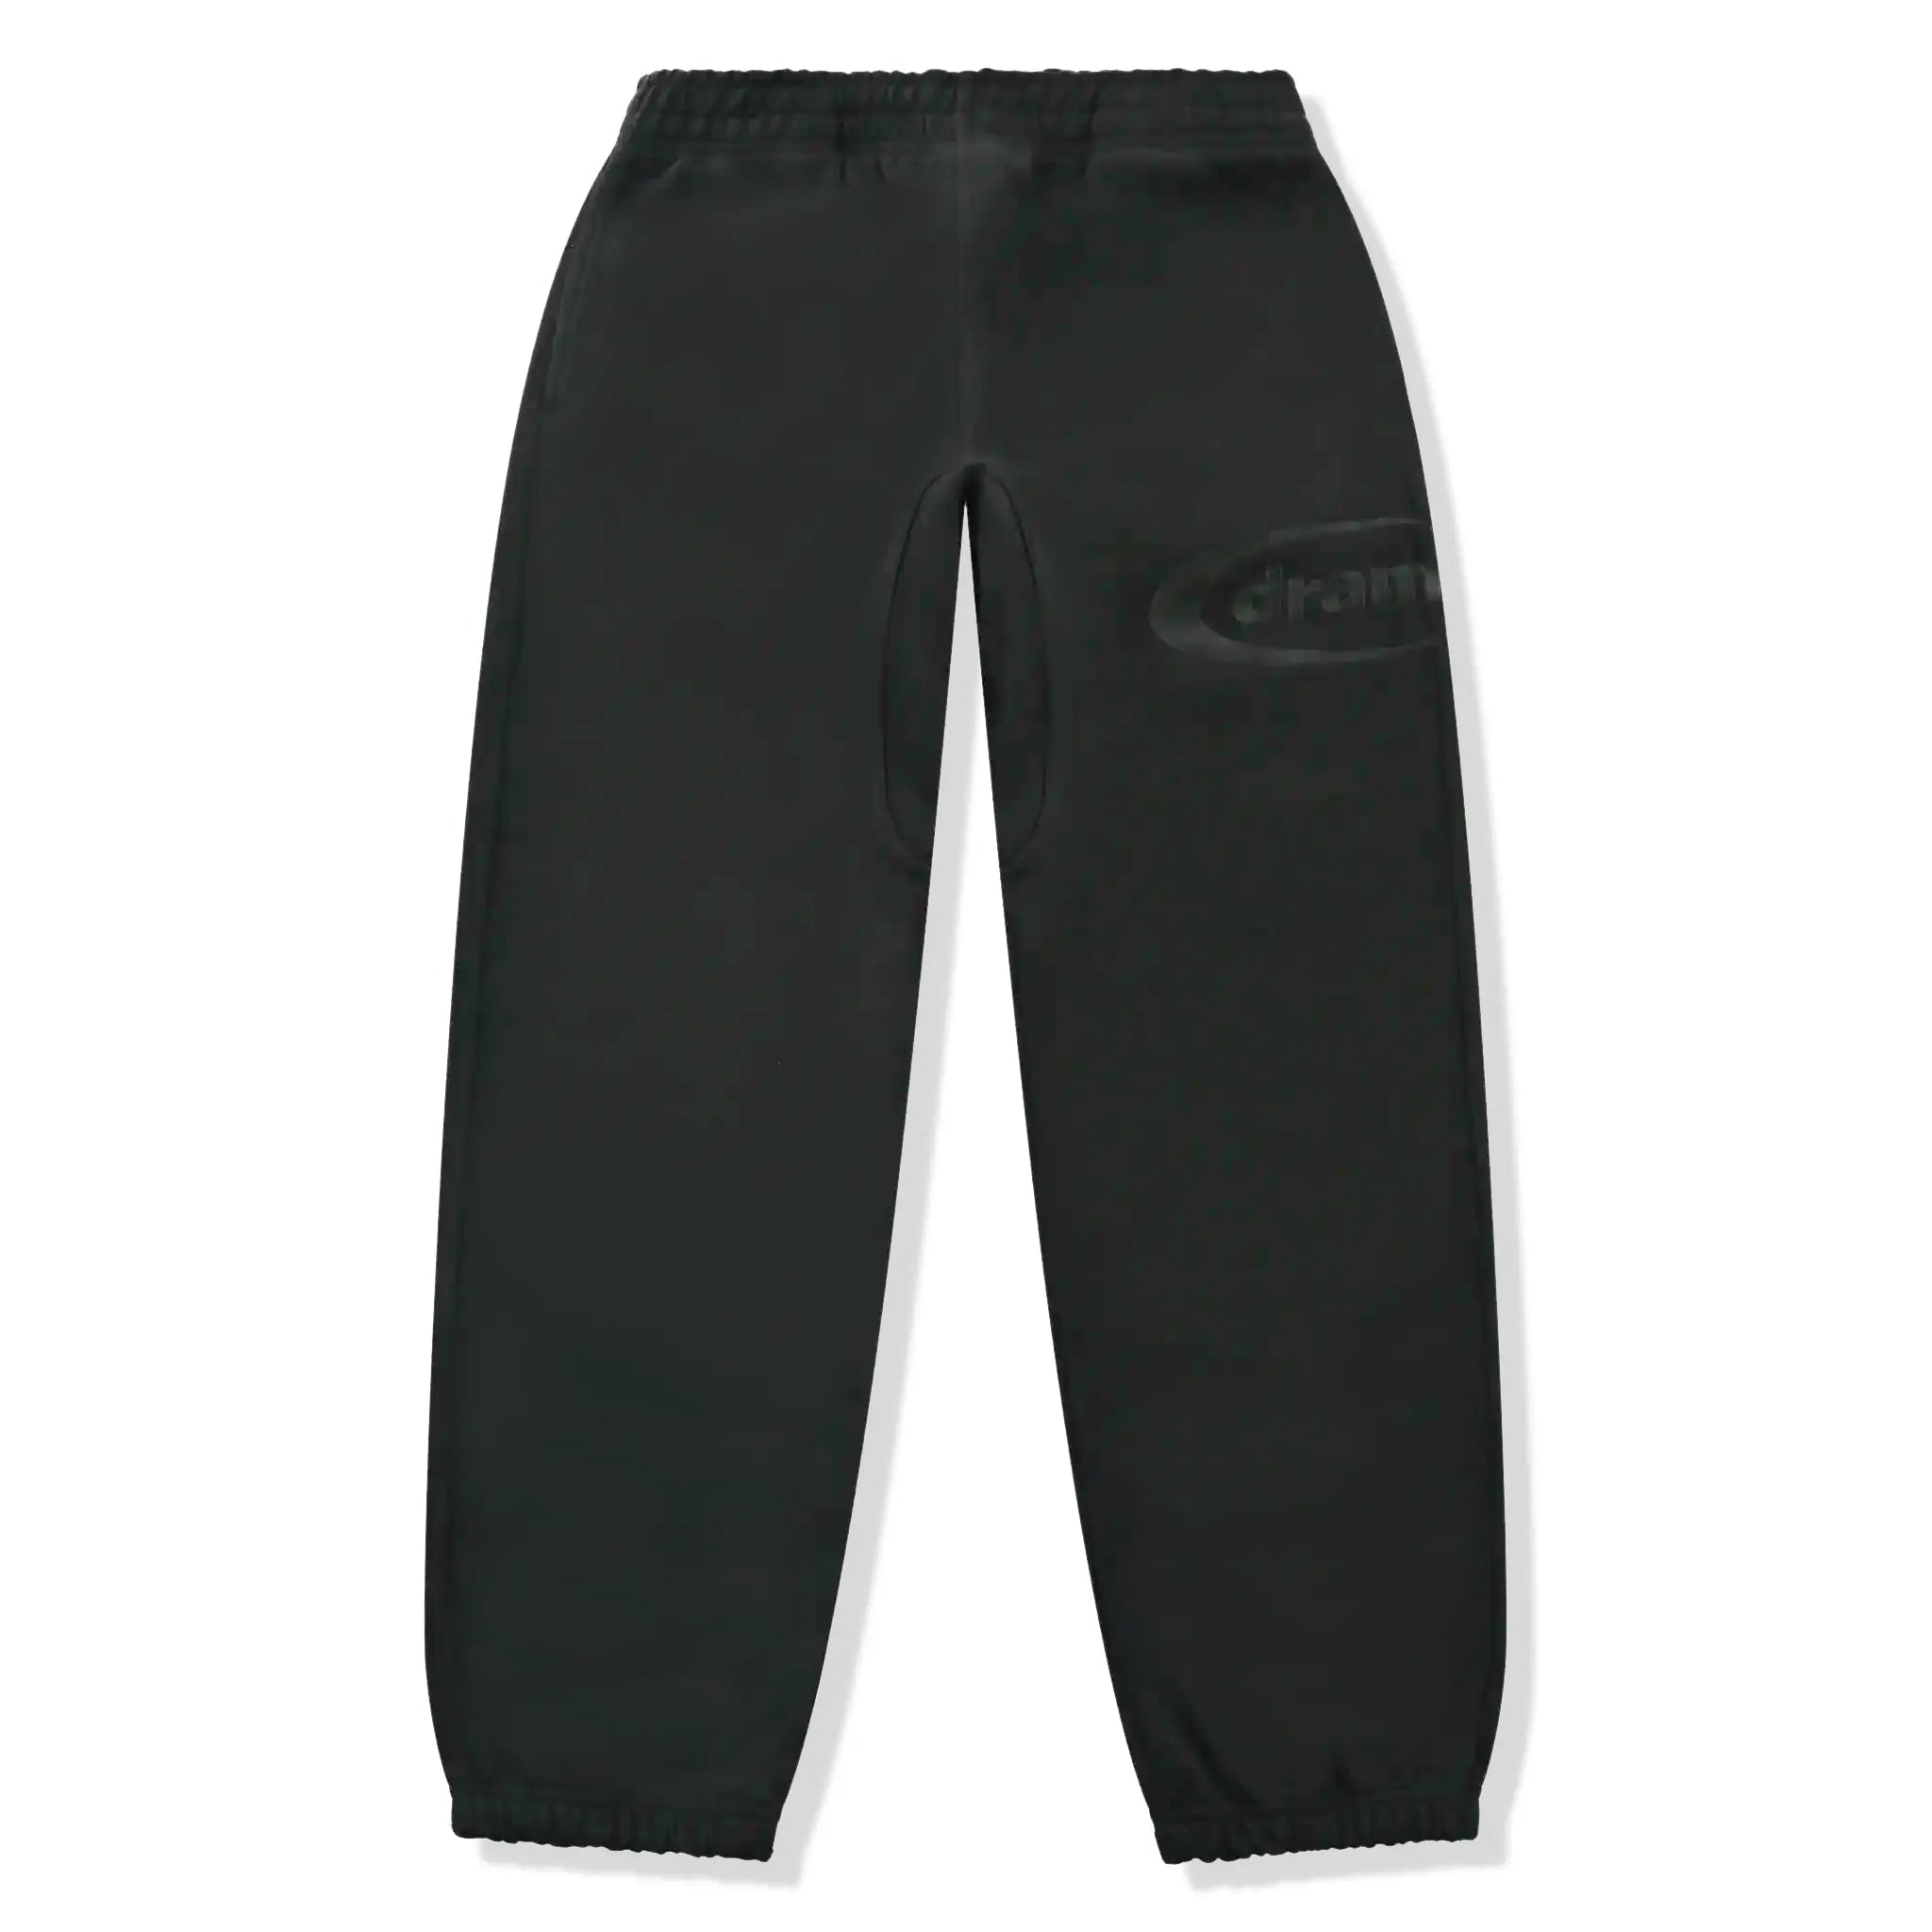 Front view of Drama Call Oval Black Sweatpants